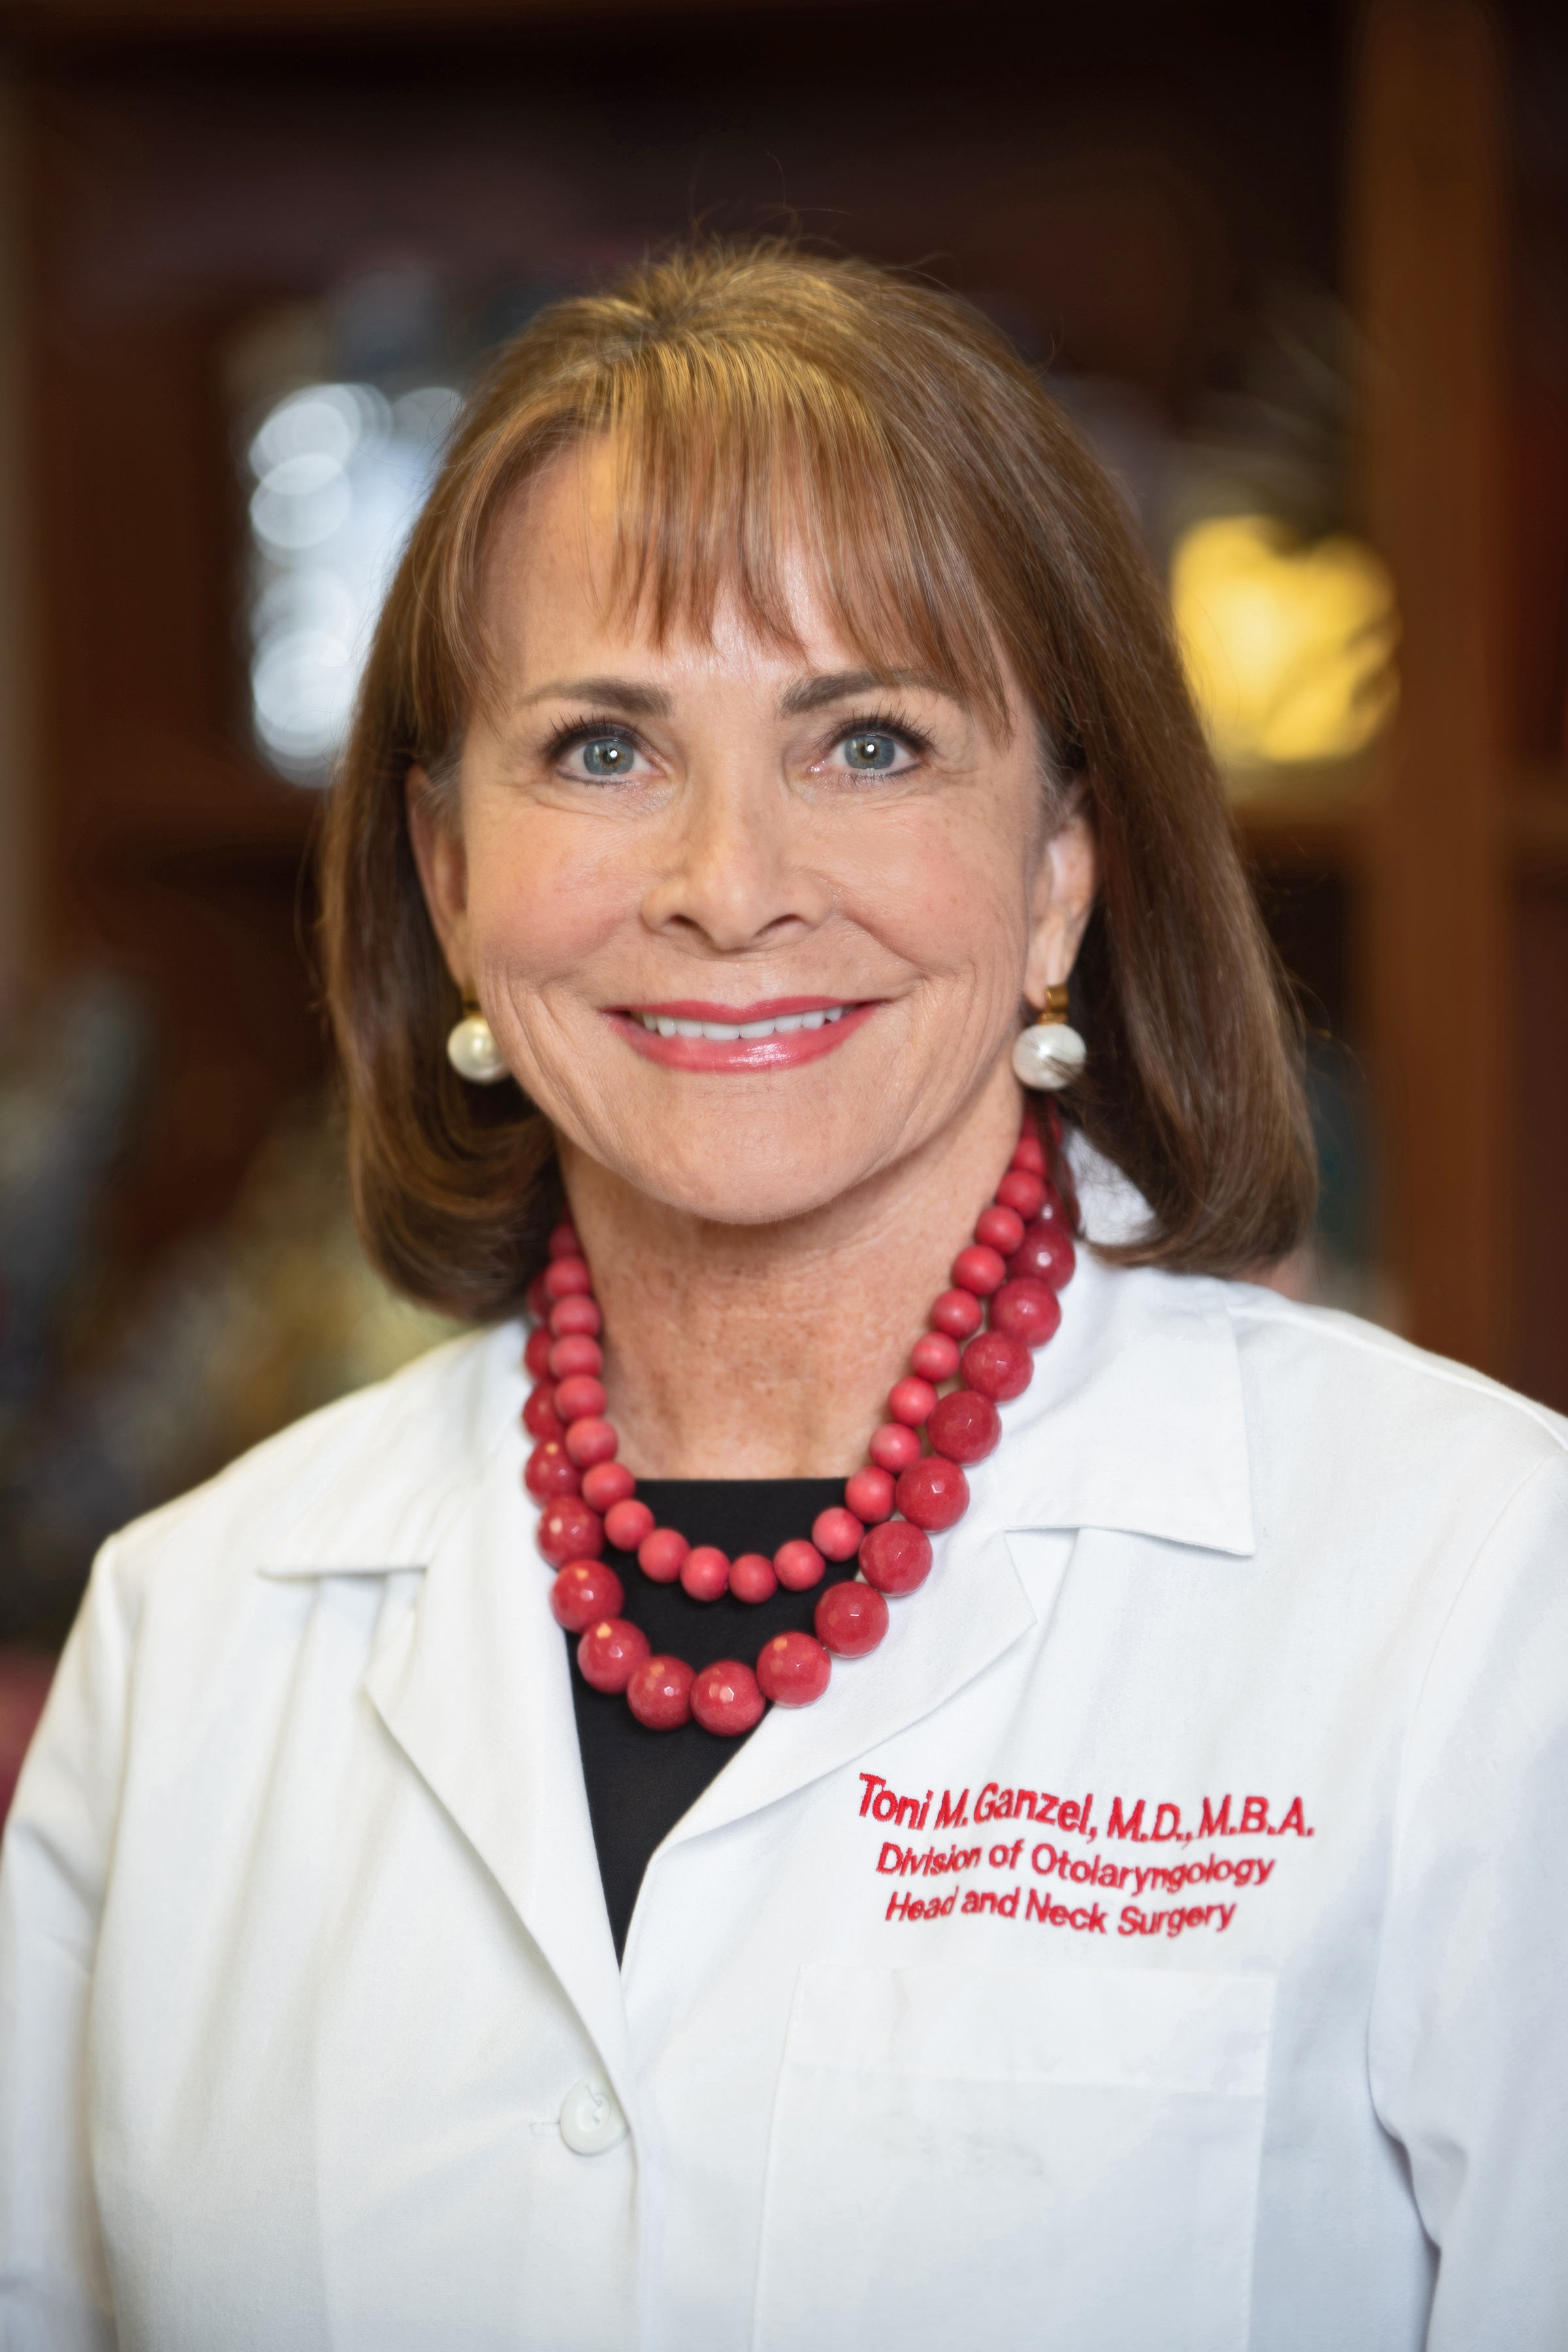 Real-life Wonder Woman: UofL School of Medicine dean shares her serendipitous journey into medicine and science